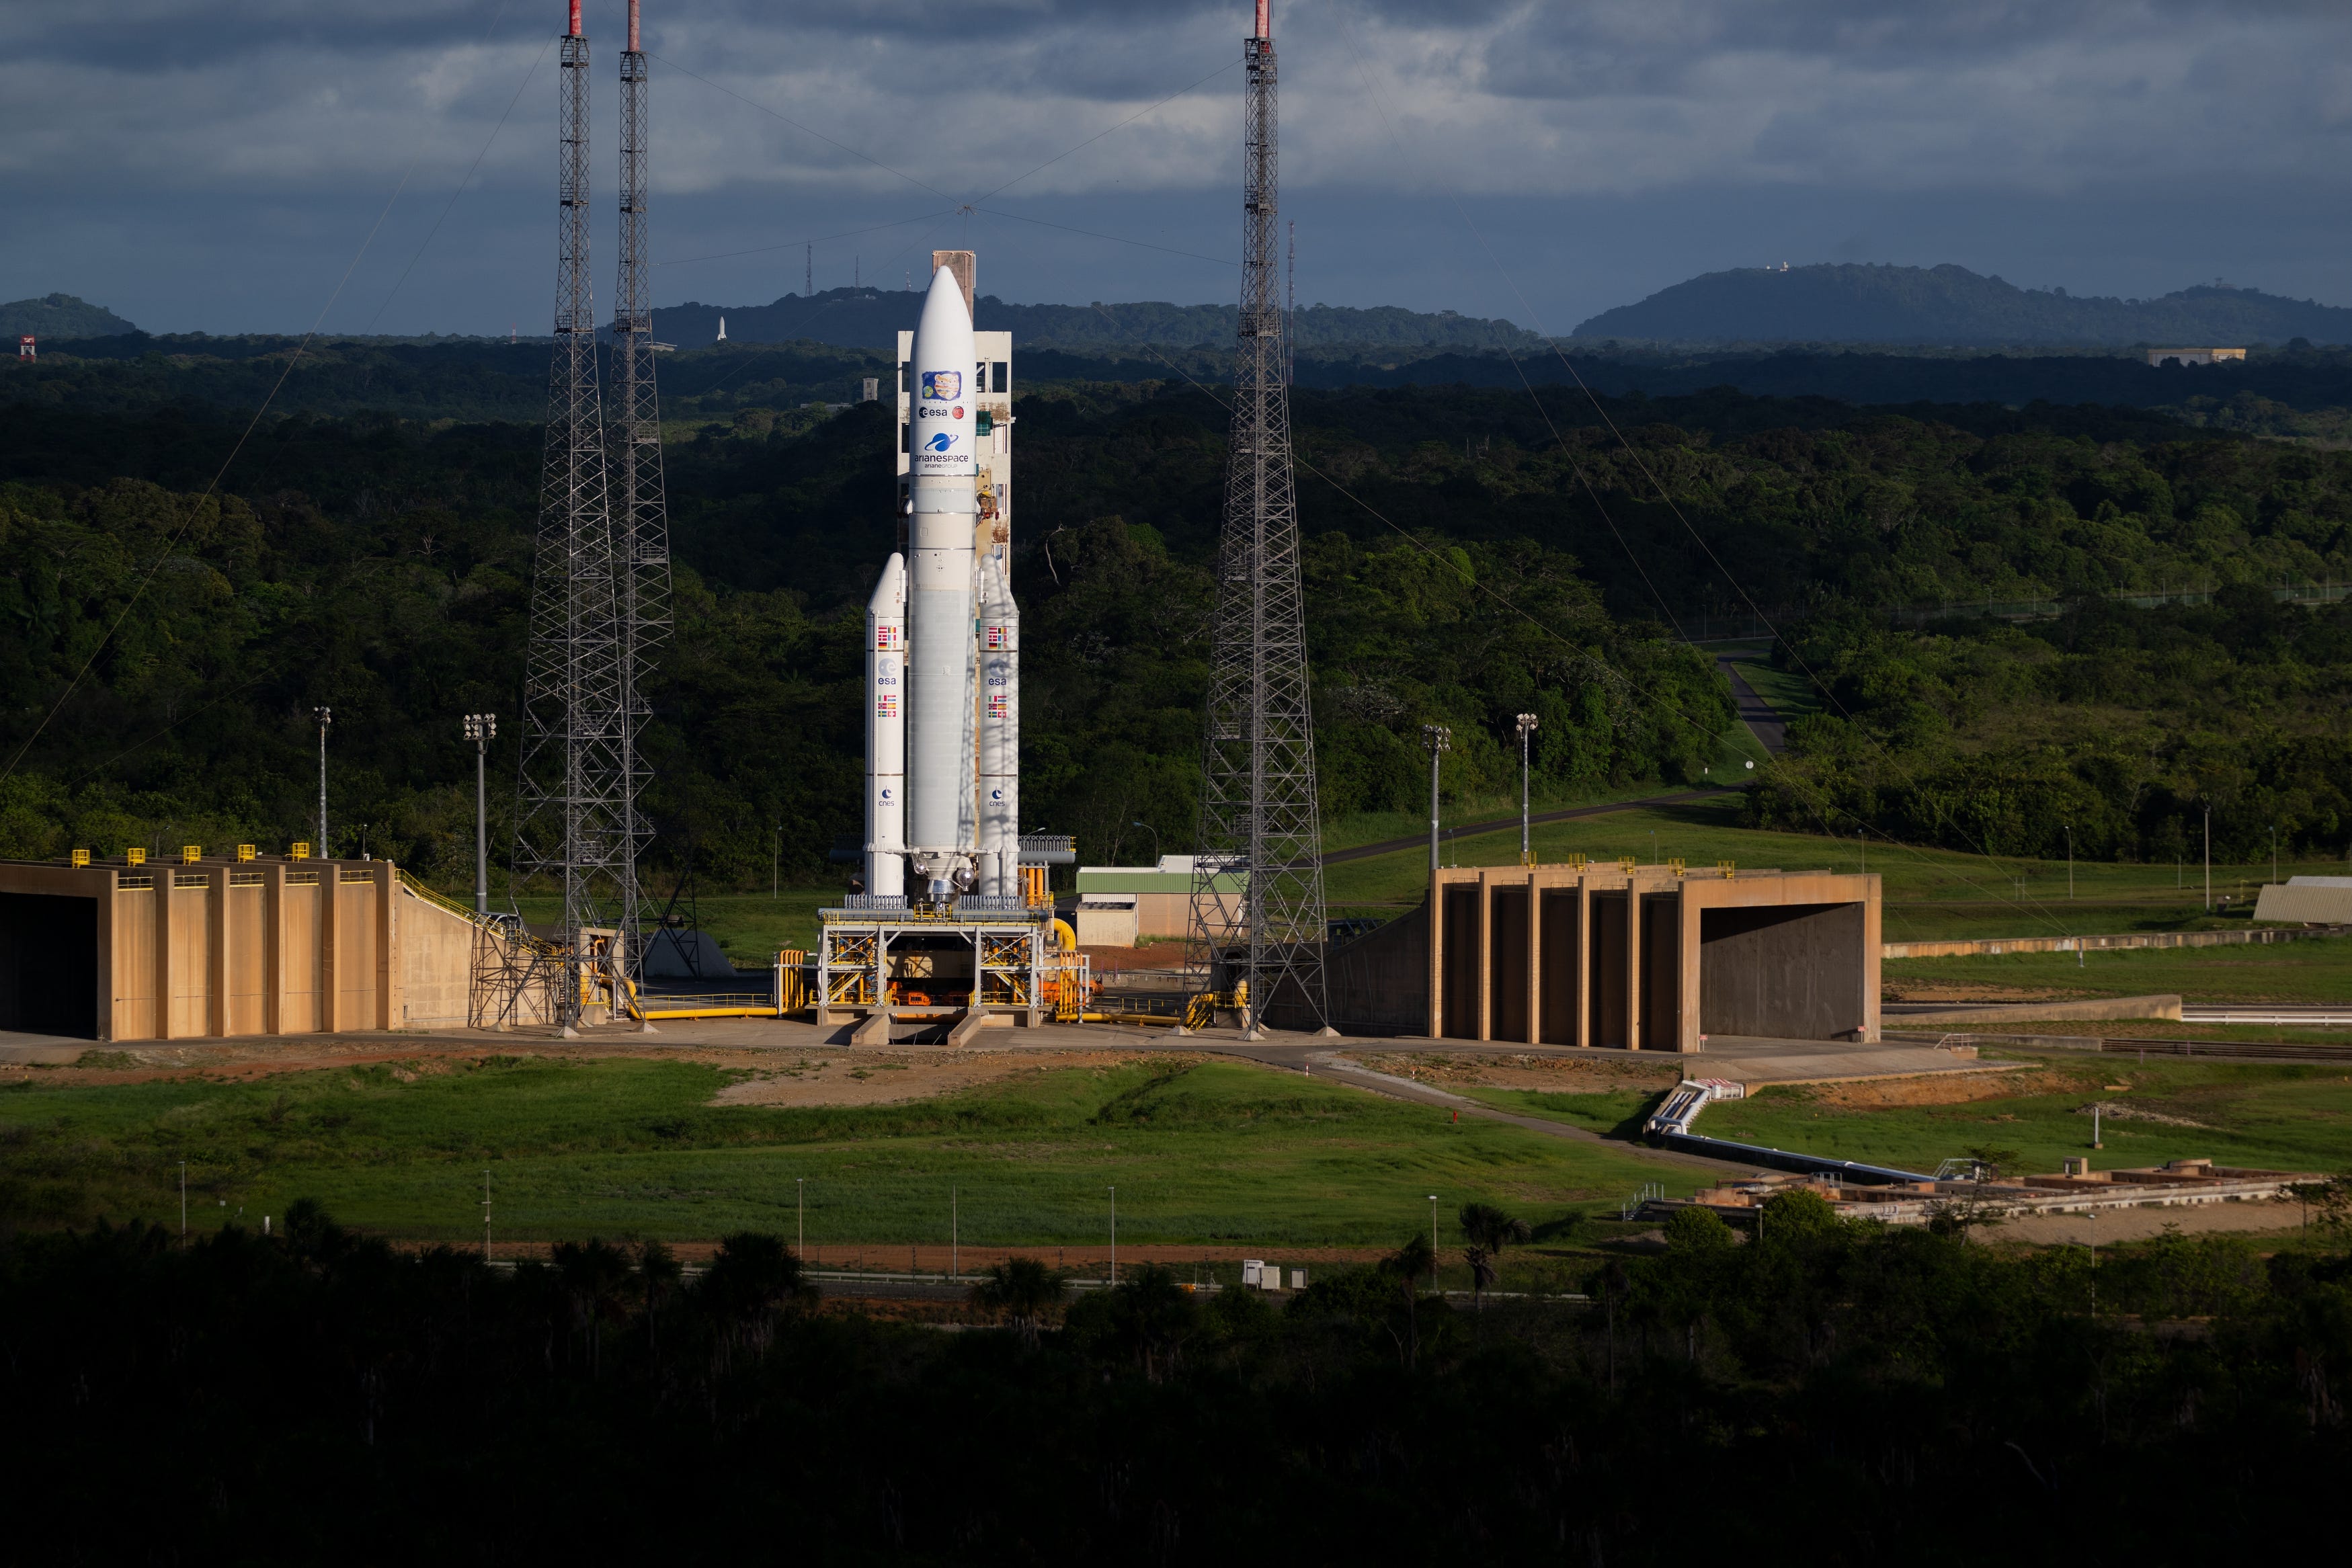 Ariane 5 rocket with Juice ready for launch (S Corvaja/ESA)